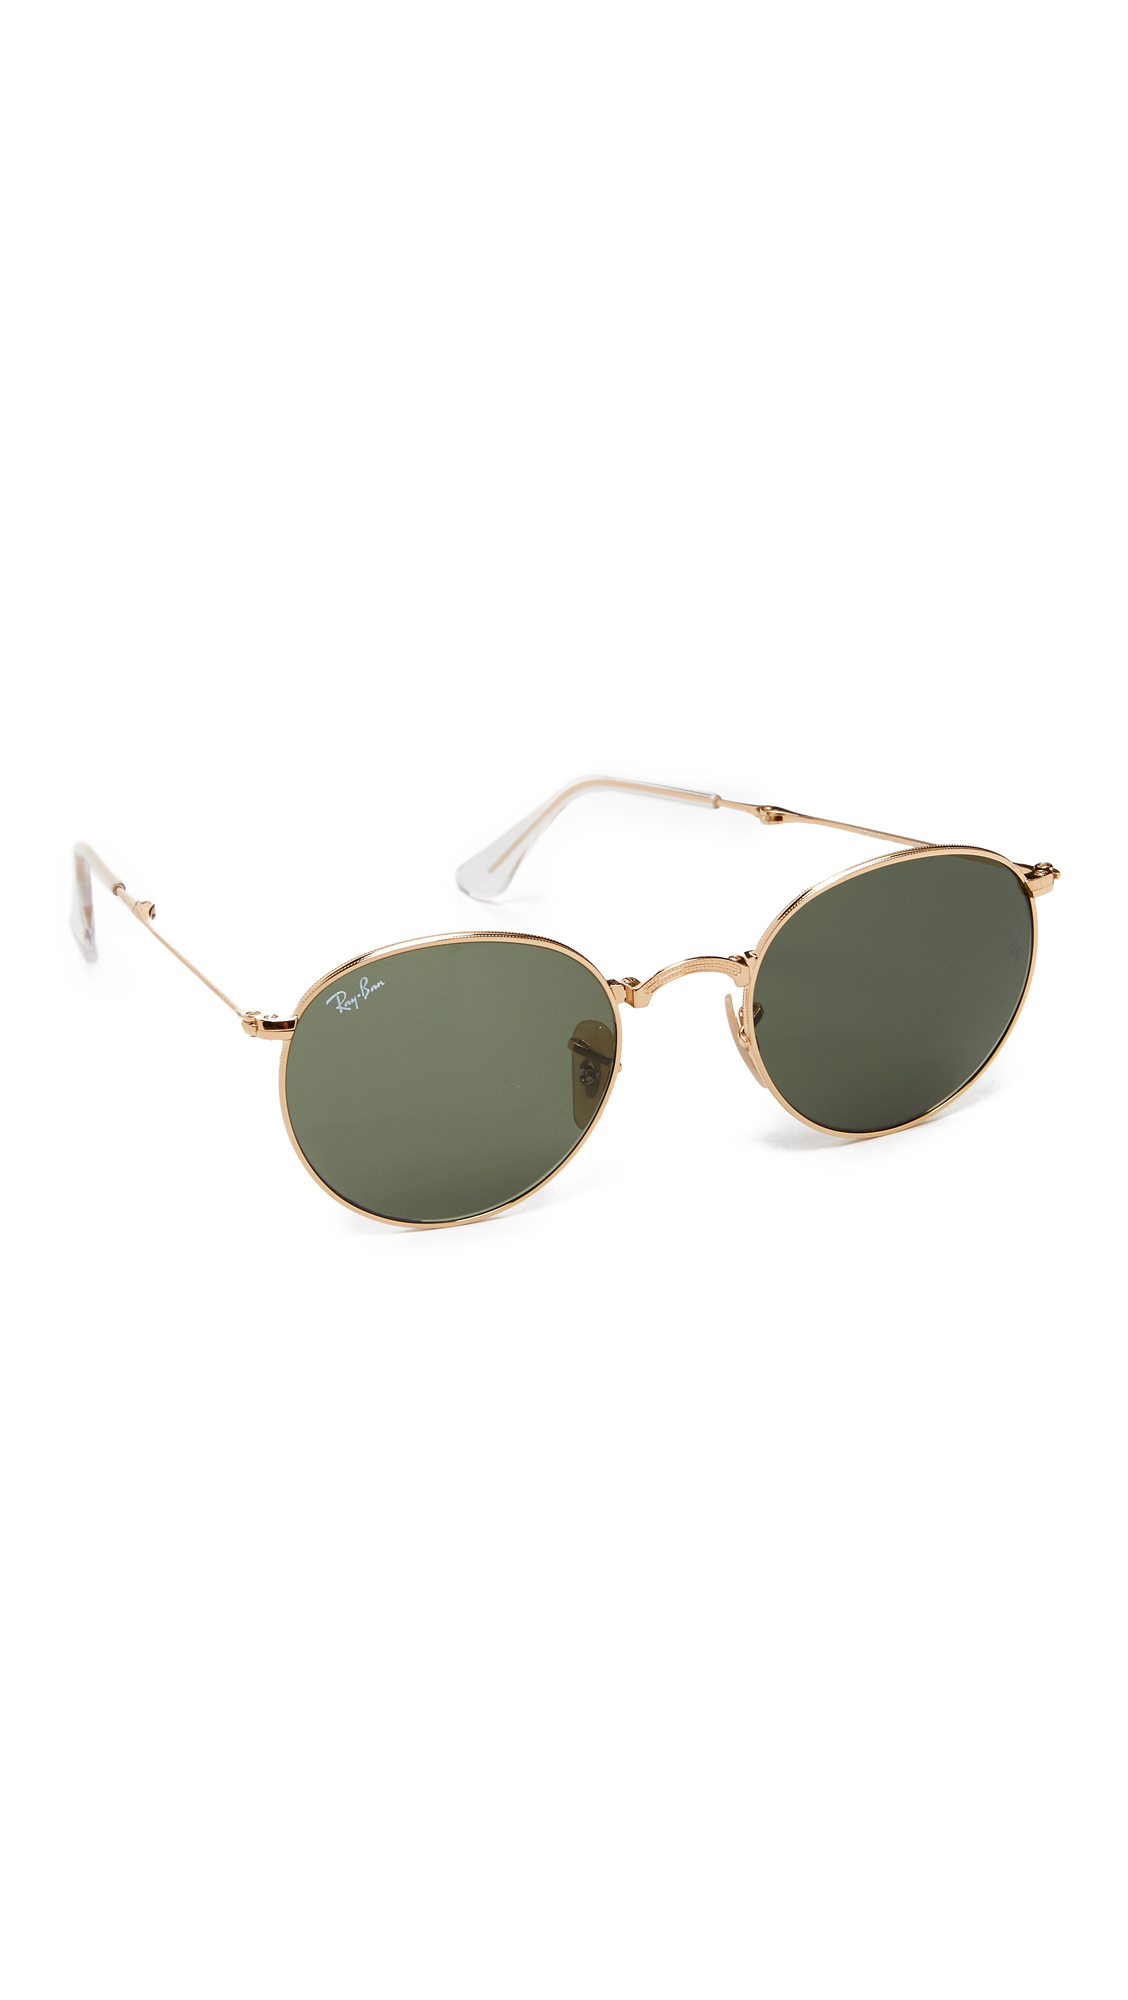 Lyst - Ray-Ban Icons Round Sunglasses in Green